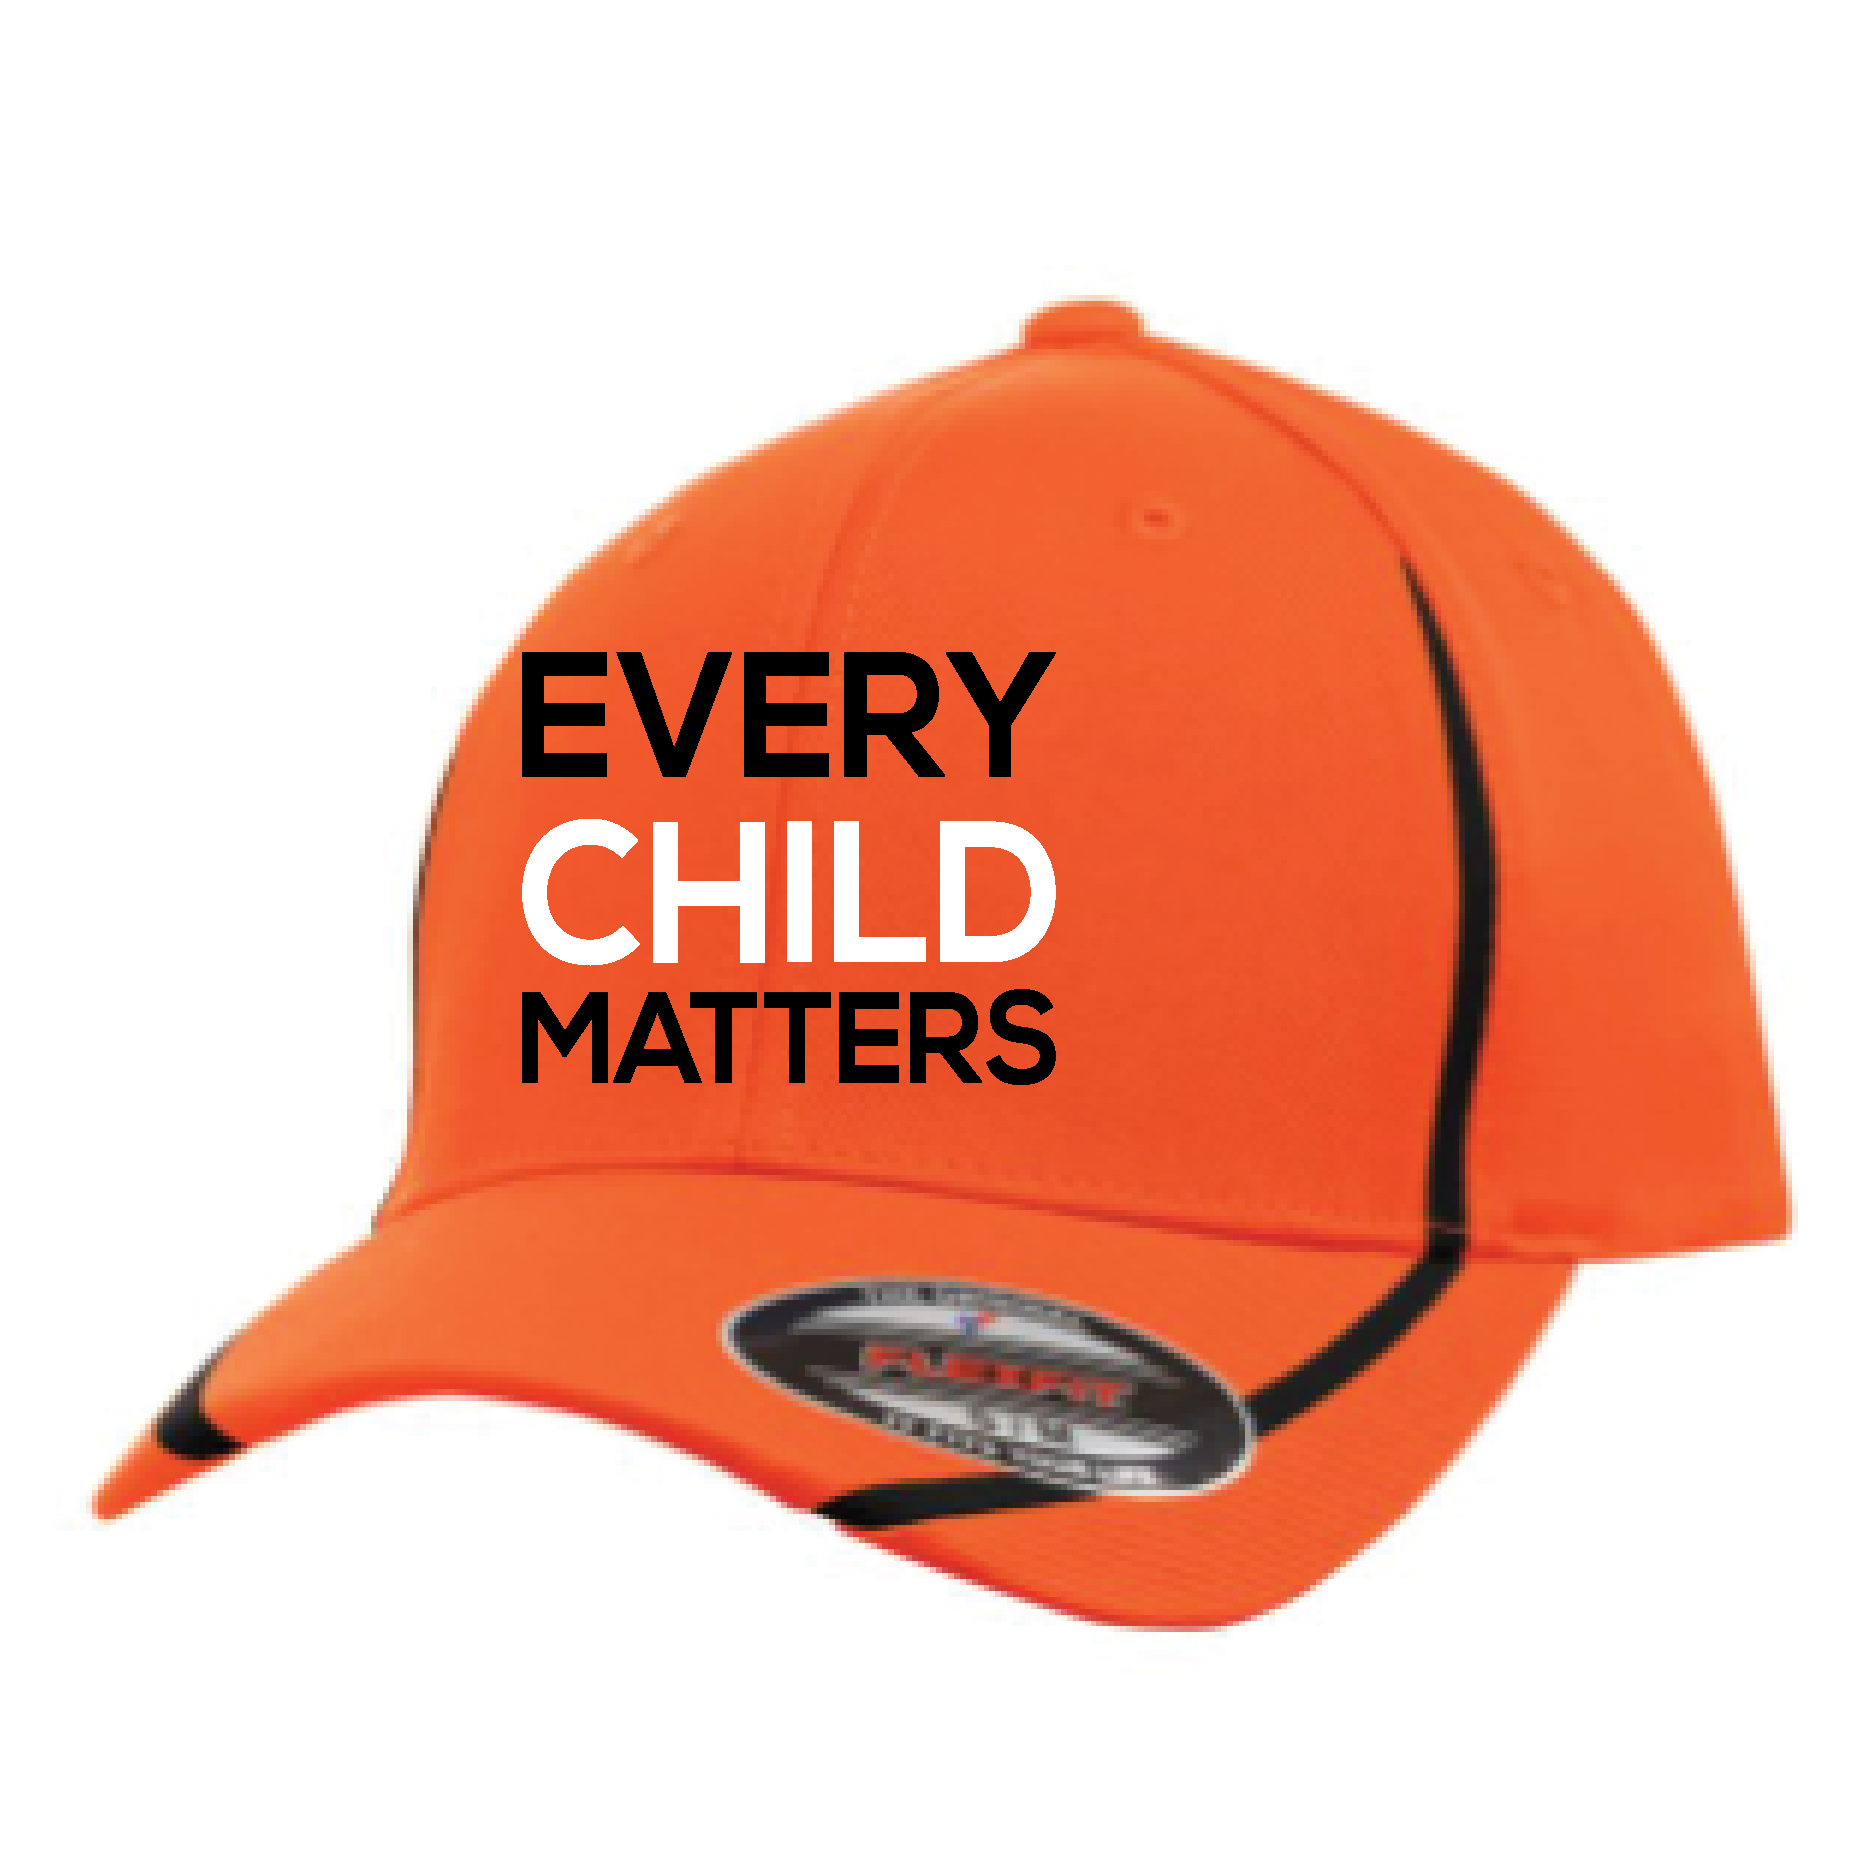 TeamFS Orange Day ATC Flex Fit Performance Hat Stitched with Every Child  Matters